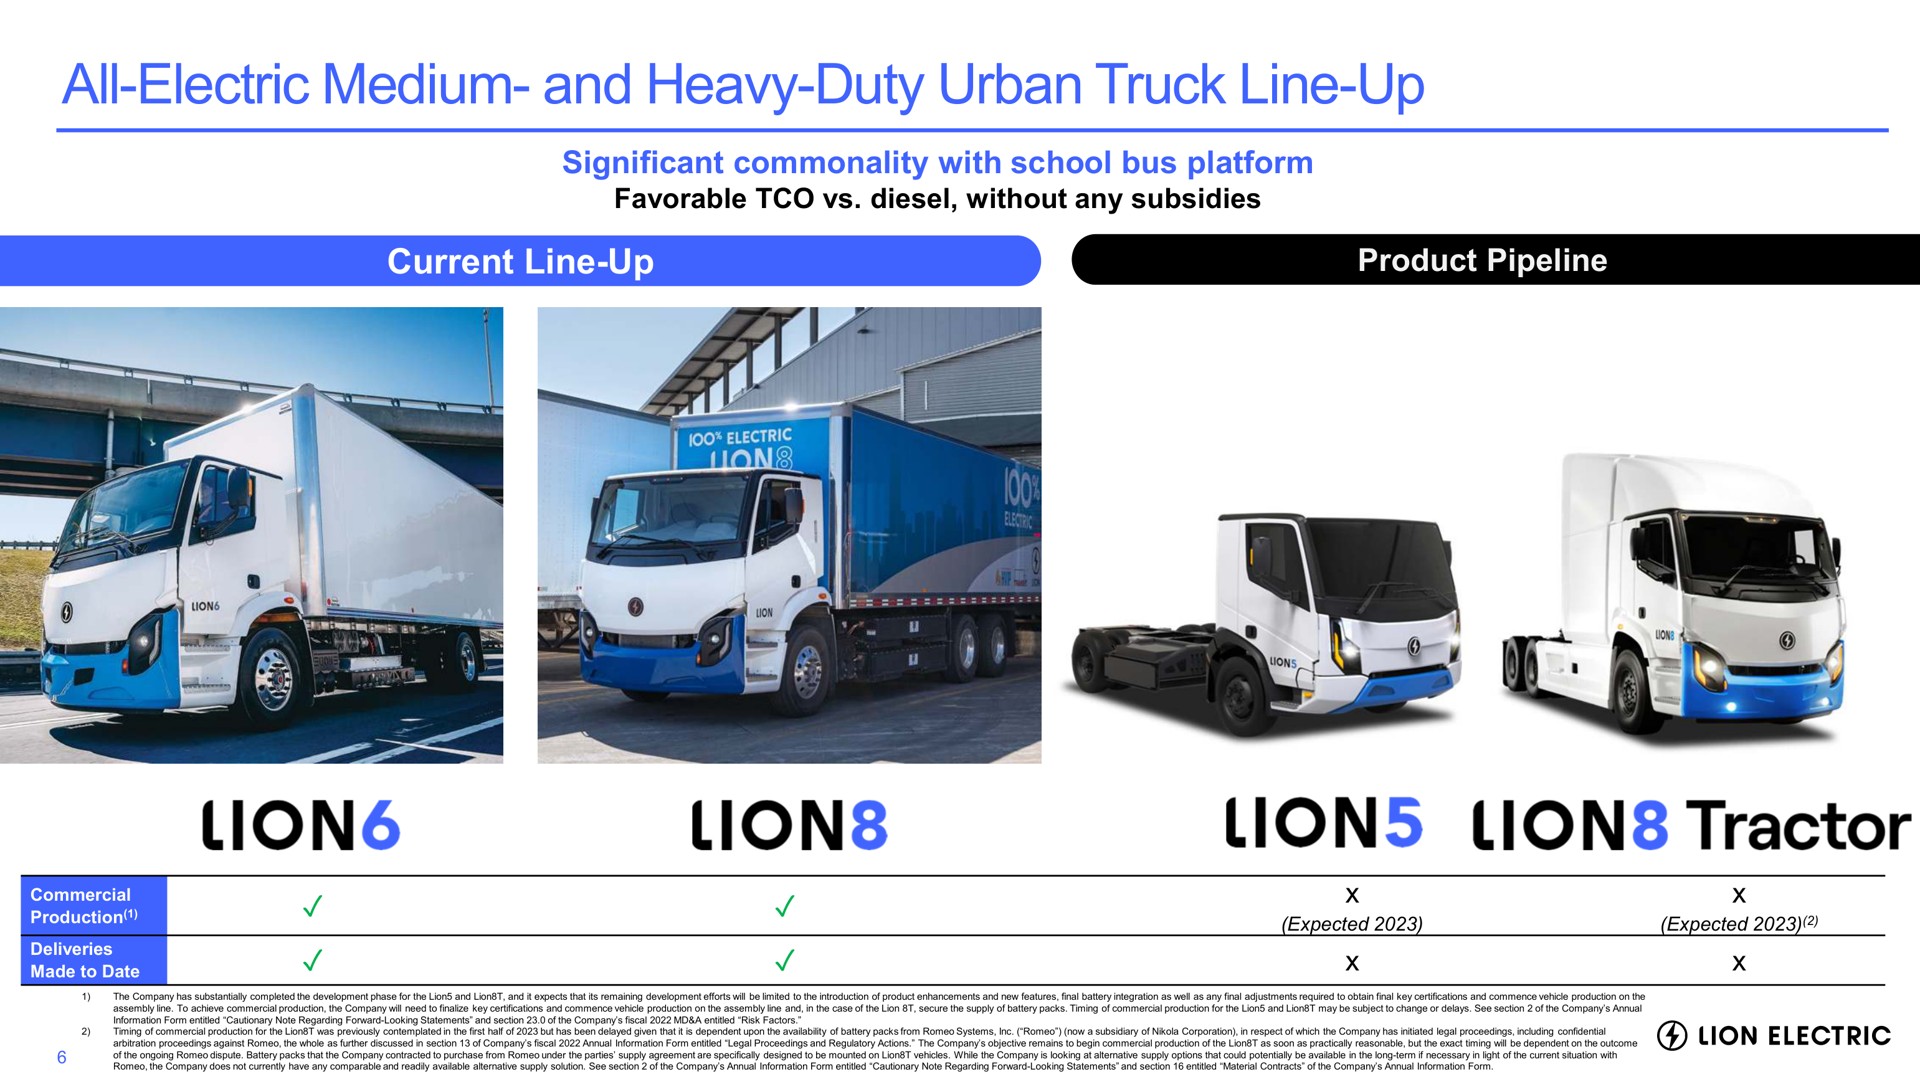 all electric medium and heavy duty urban truck line up significant commonality with school bus platform current line up product pipeline favorable diesel without any subsidies lions lions lions tractor | Lion Electric